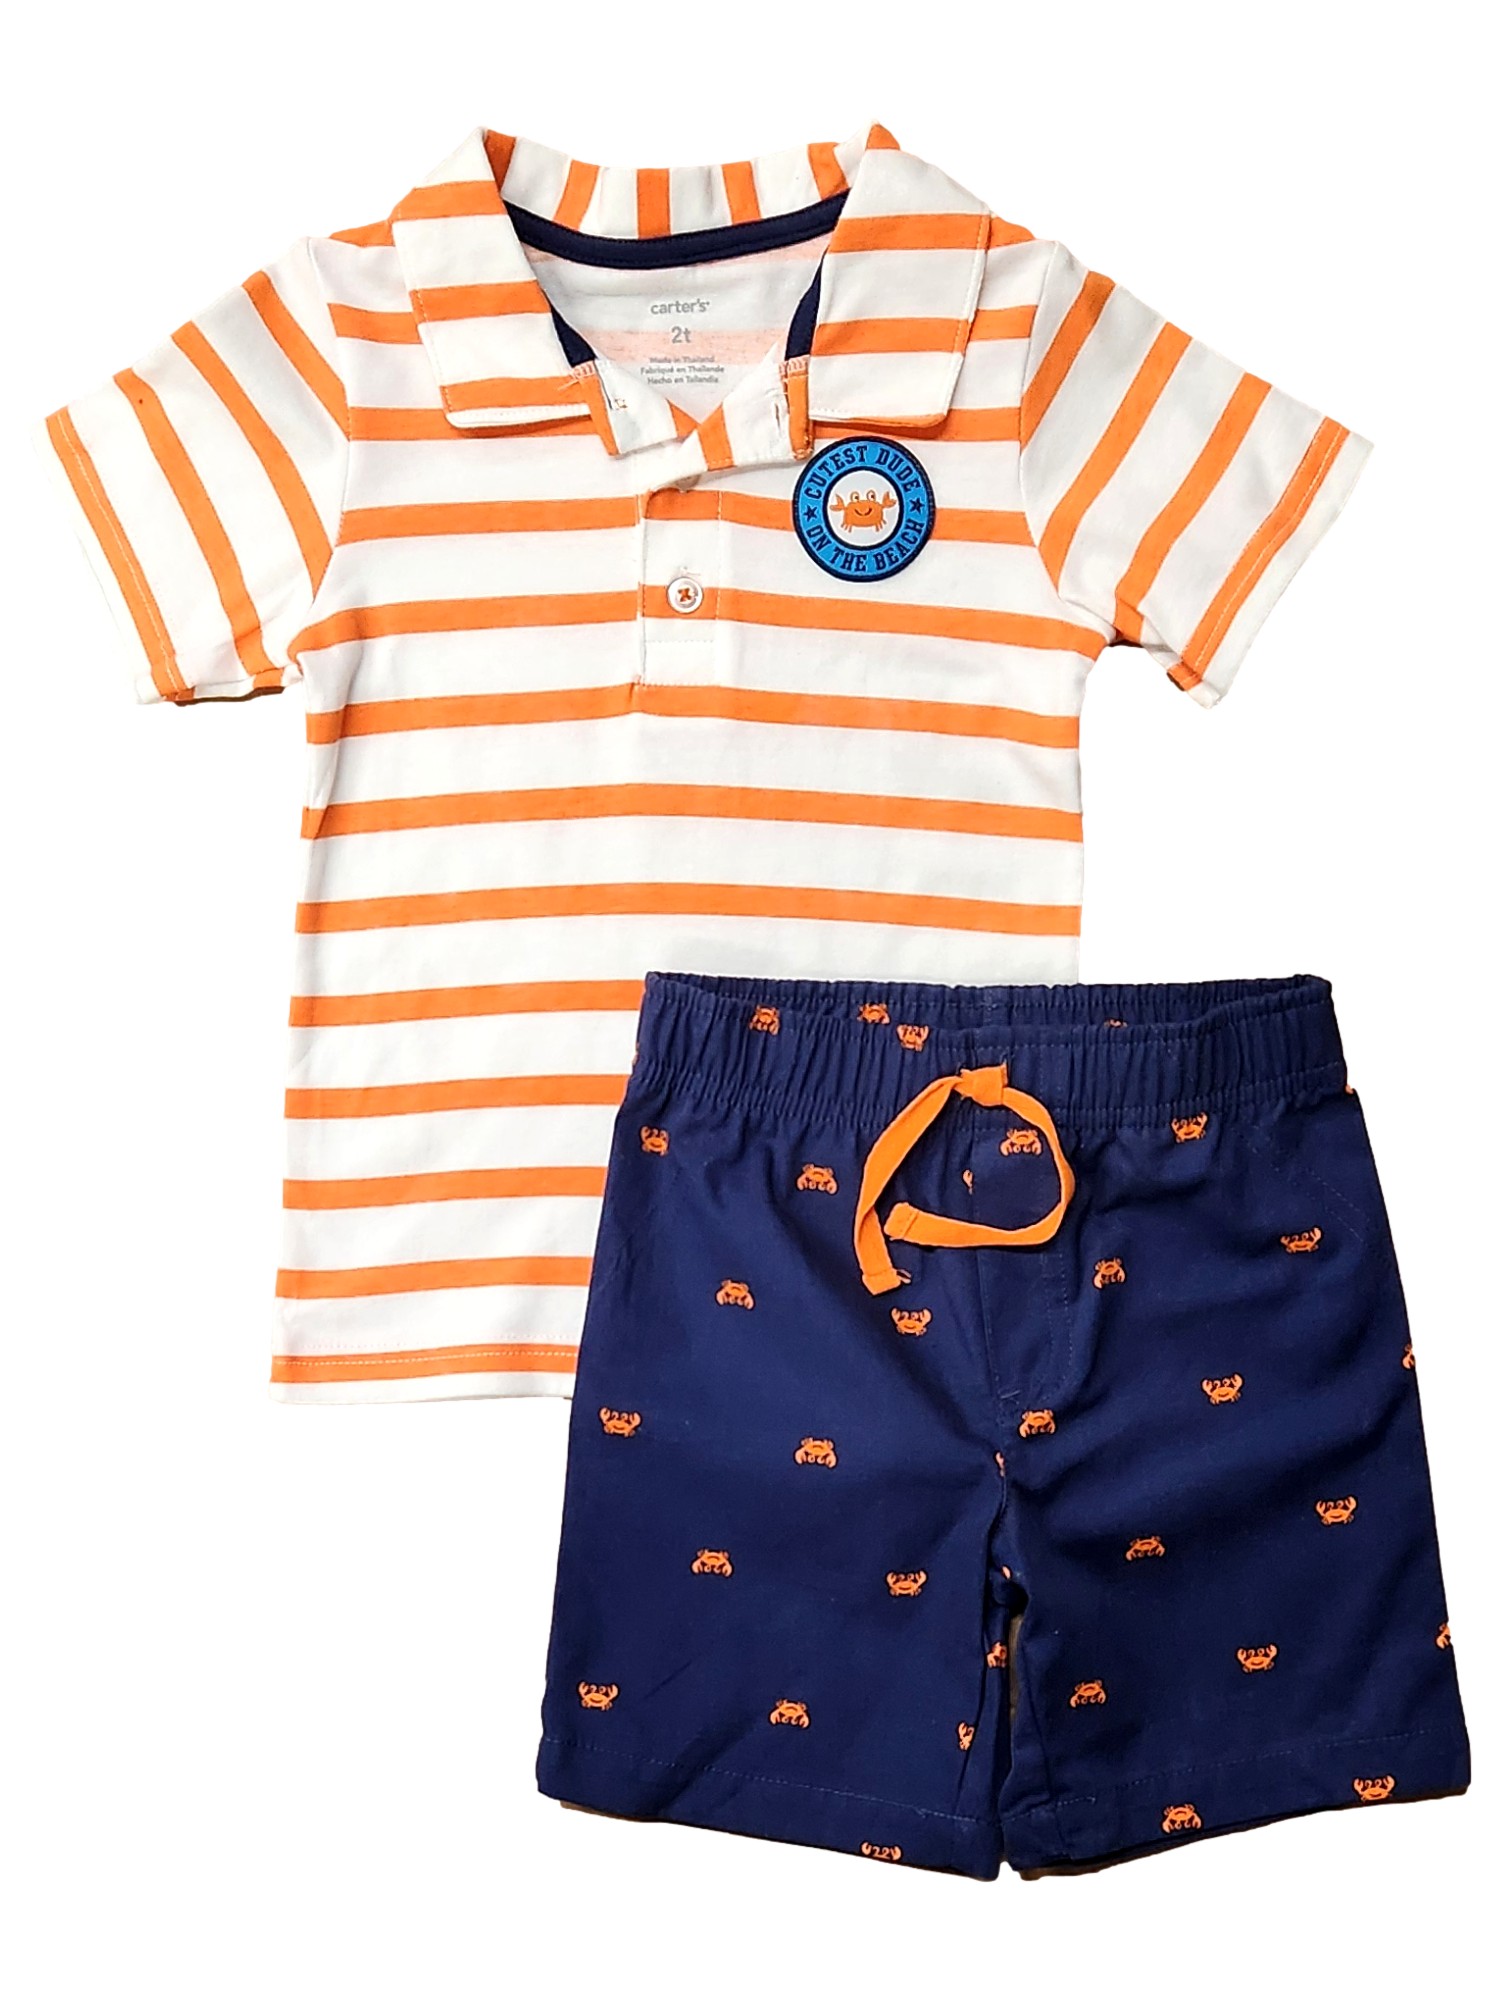 Carter's Carters Toddler Boys White Stripe Crab Polo Shirt & Shorts Outfit Set 2T